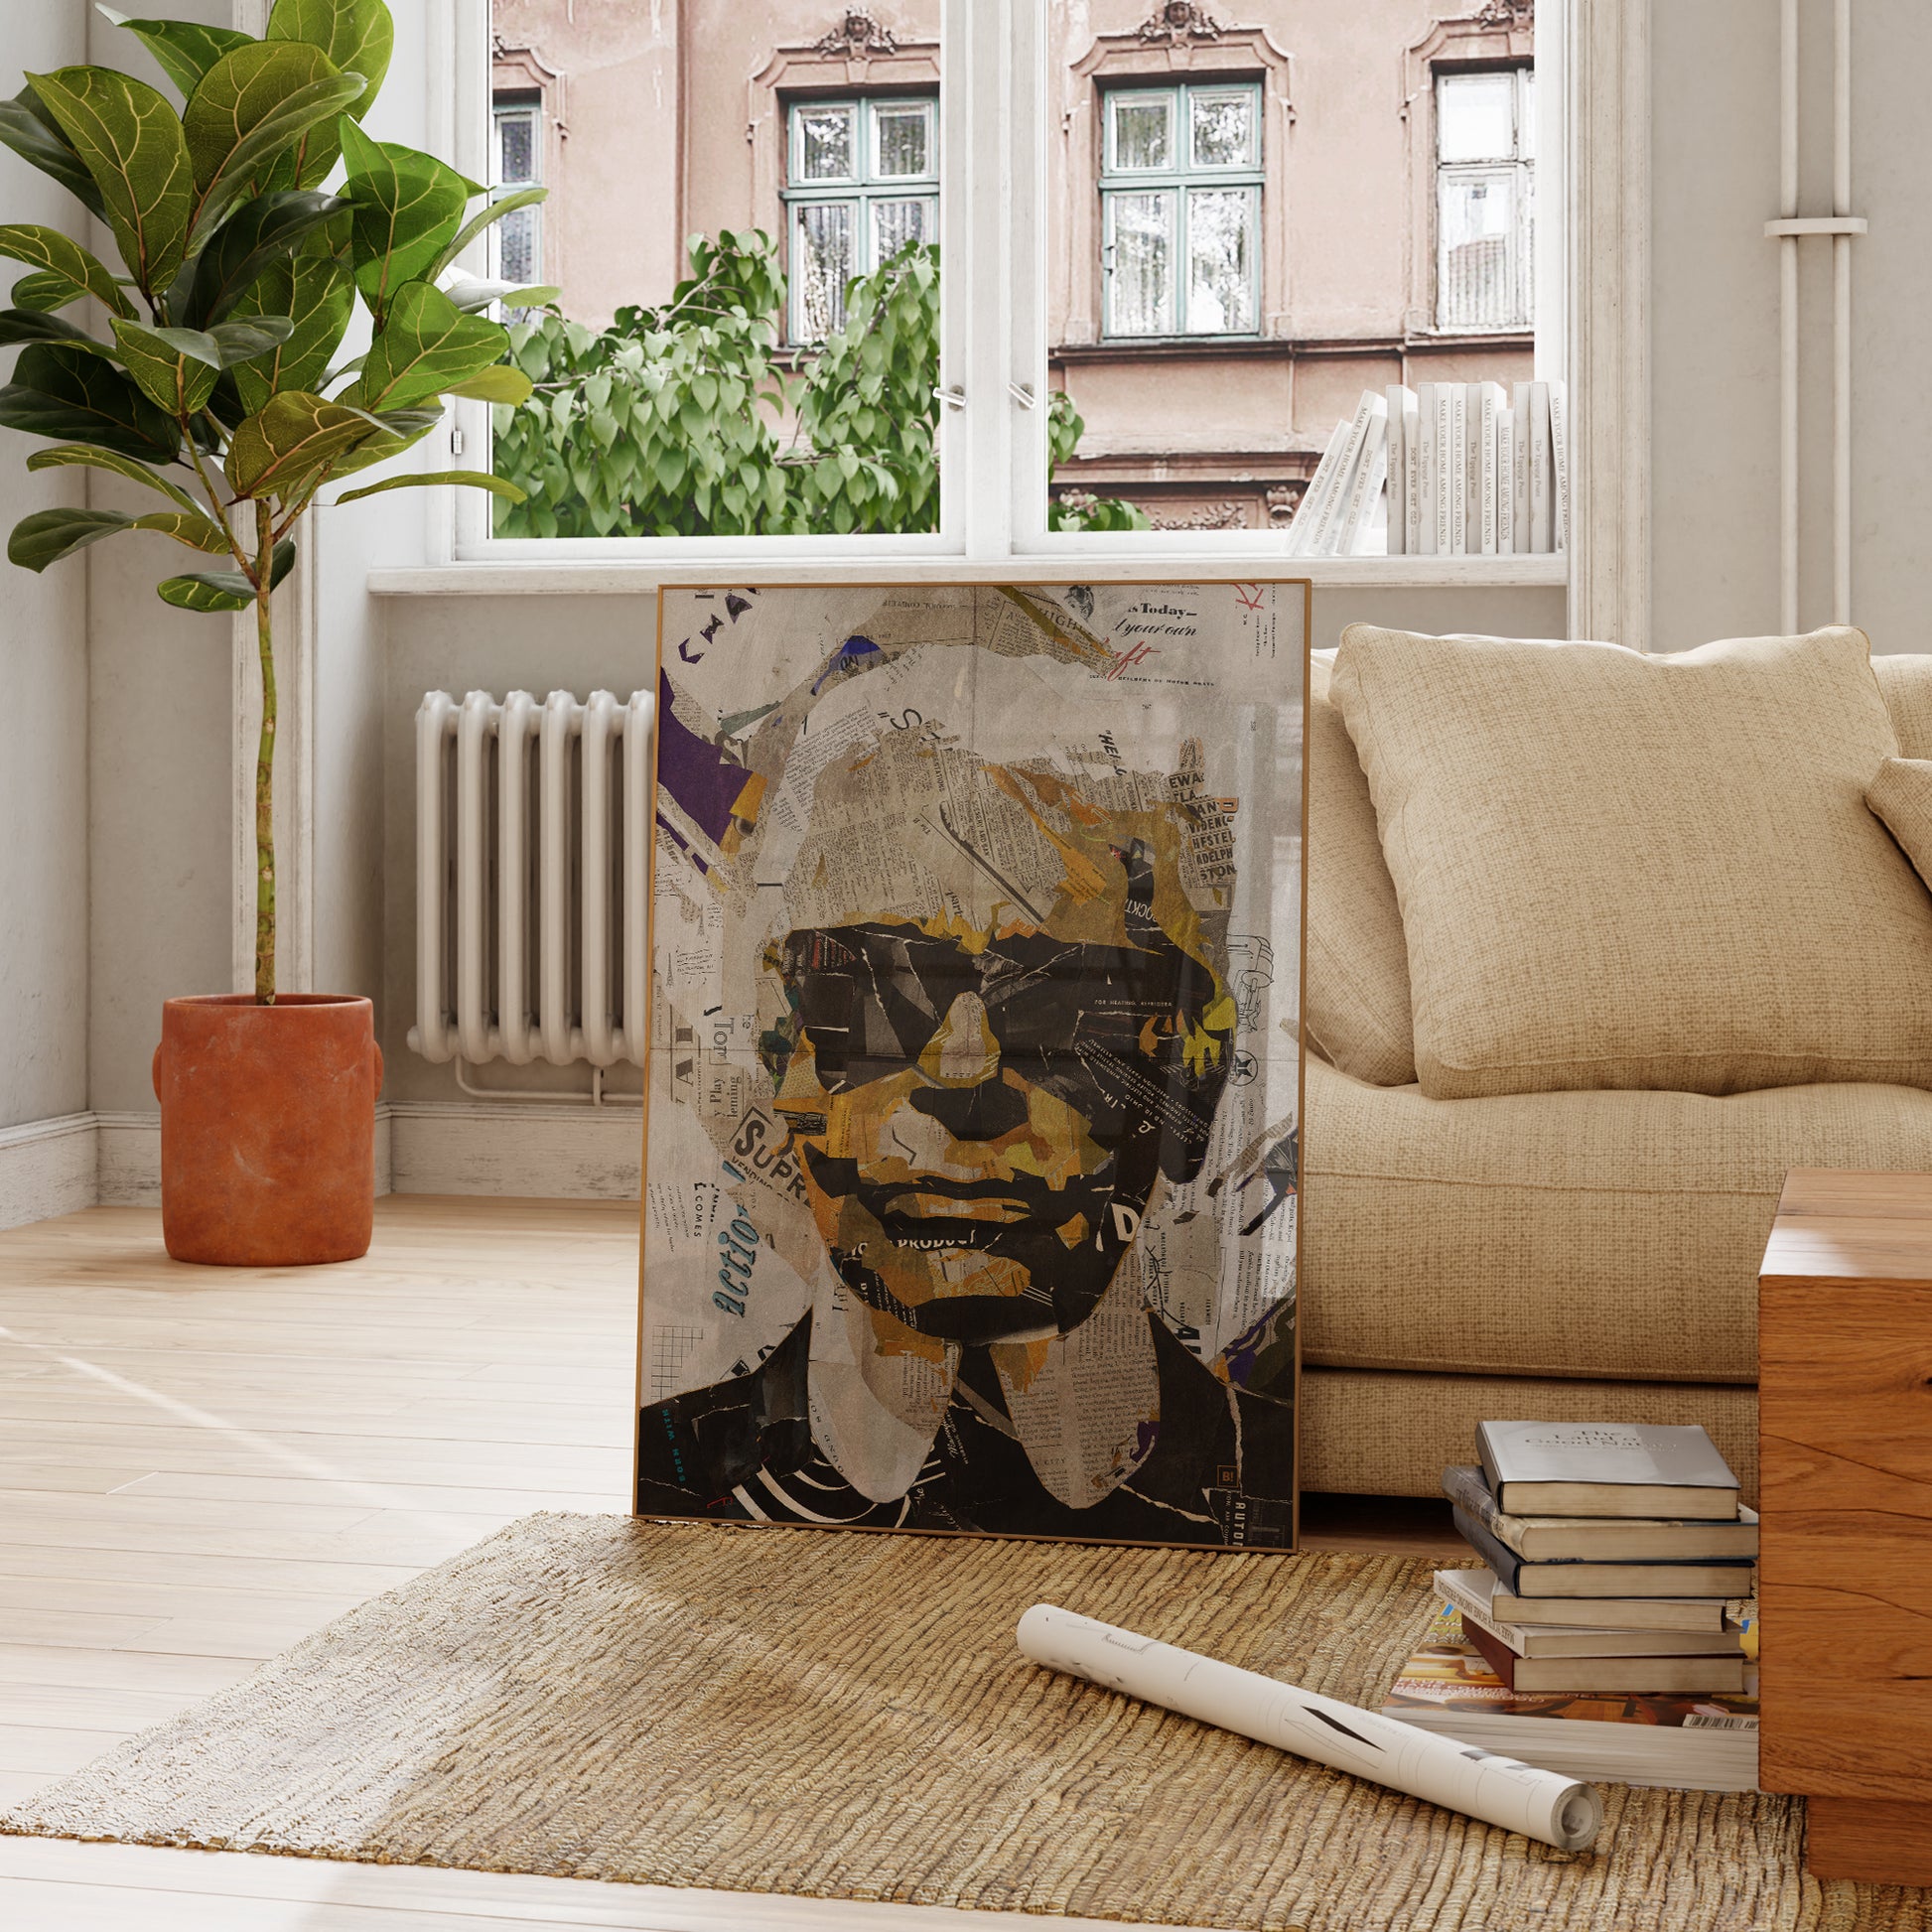 Be inspired by our iconic collage portrait art print of Karl Lagerfeld. This artwork was printed using the giclée process on archival acid-free paper and is presented in a French living room, capturing its timeless beauty in every detail.